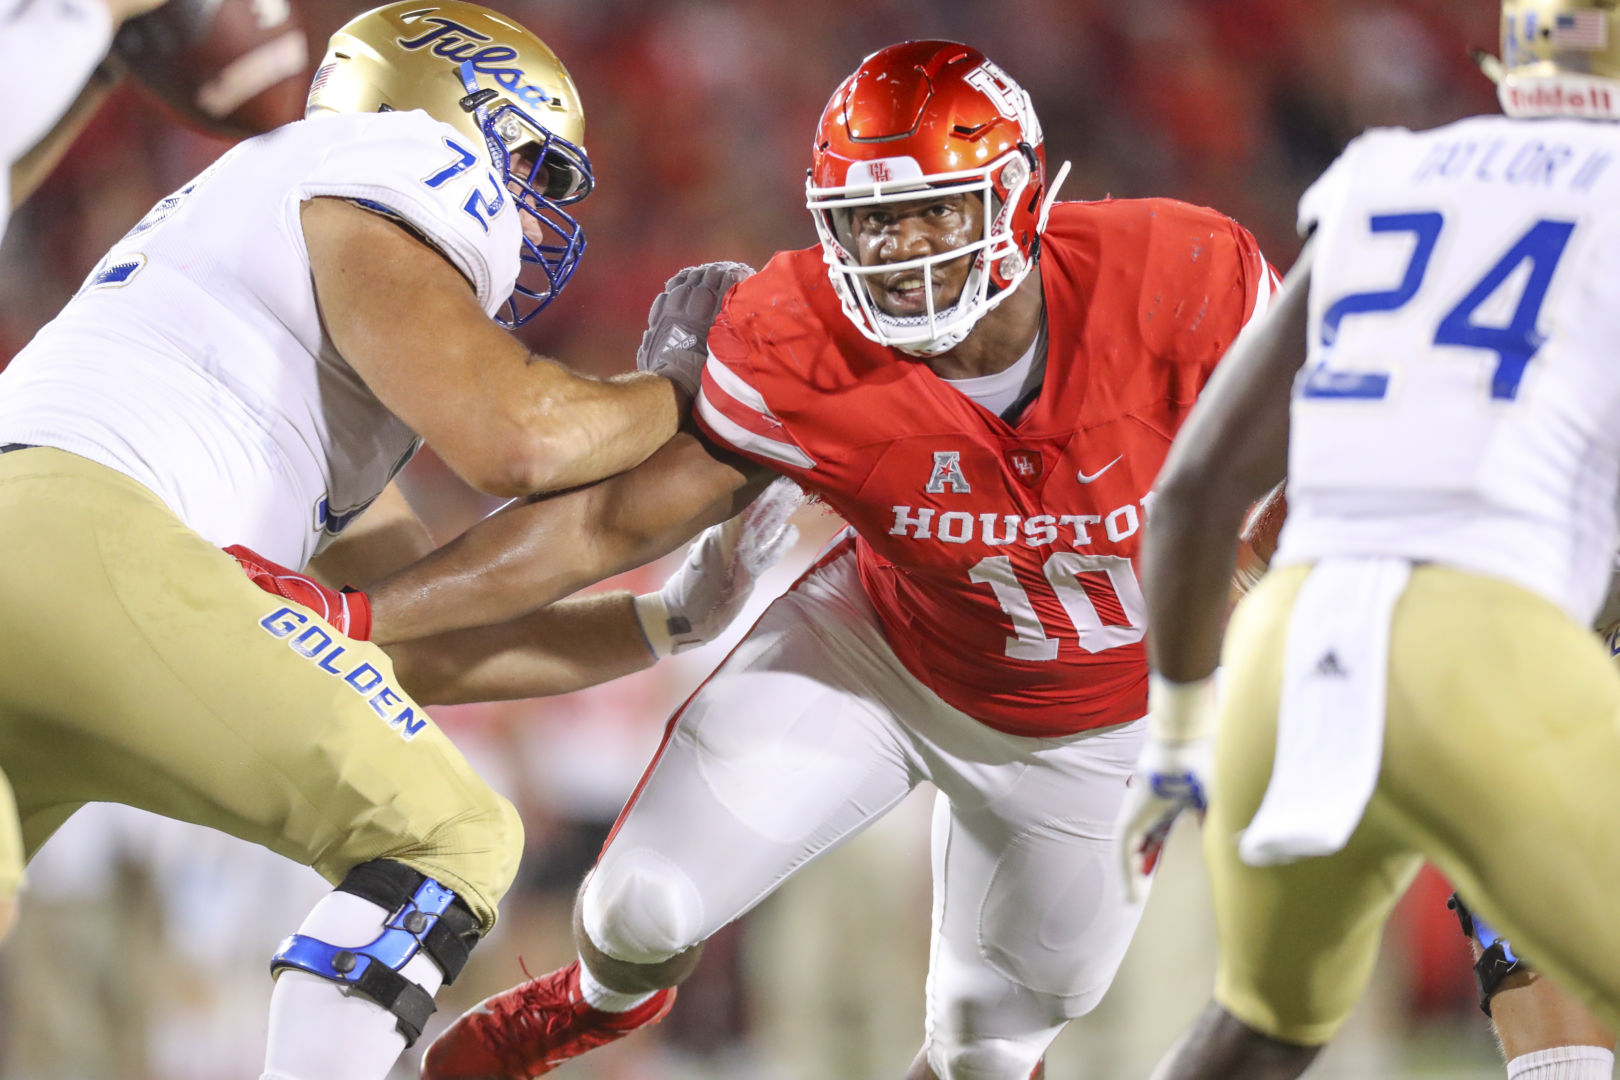 Ed Oliver, an alumnus who was the 2017 AAC Defensive Player of the Year with the Cougars, will play in his first NFL playoff game at NRG Stadium on Saturday afternoon. | File Photo